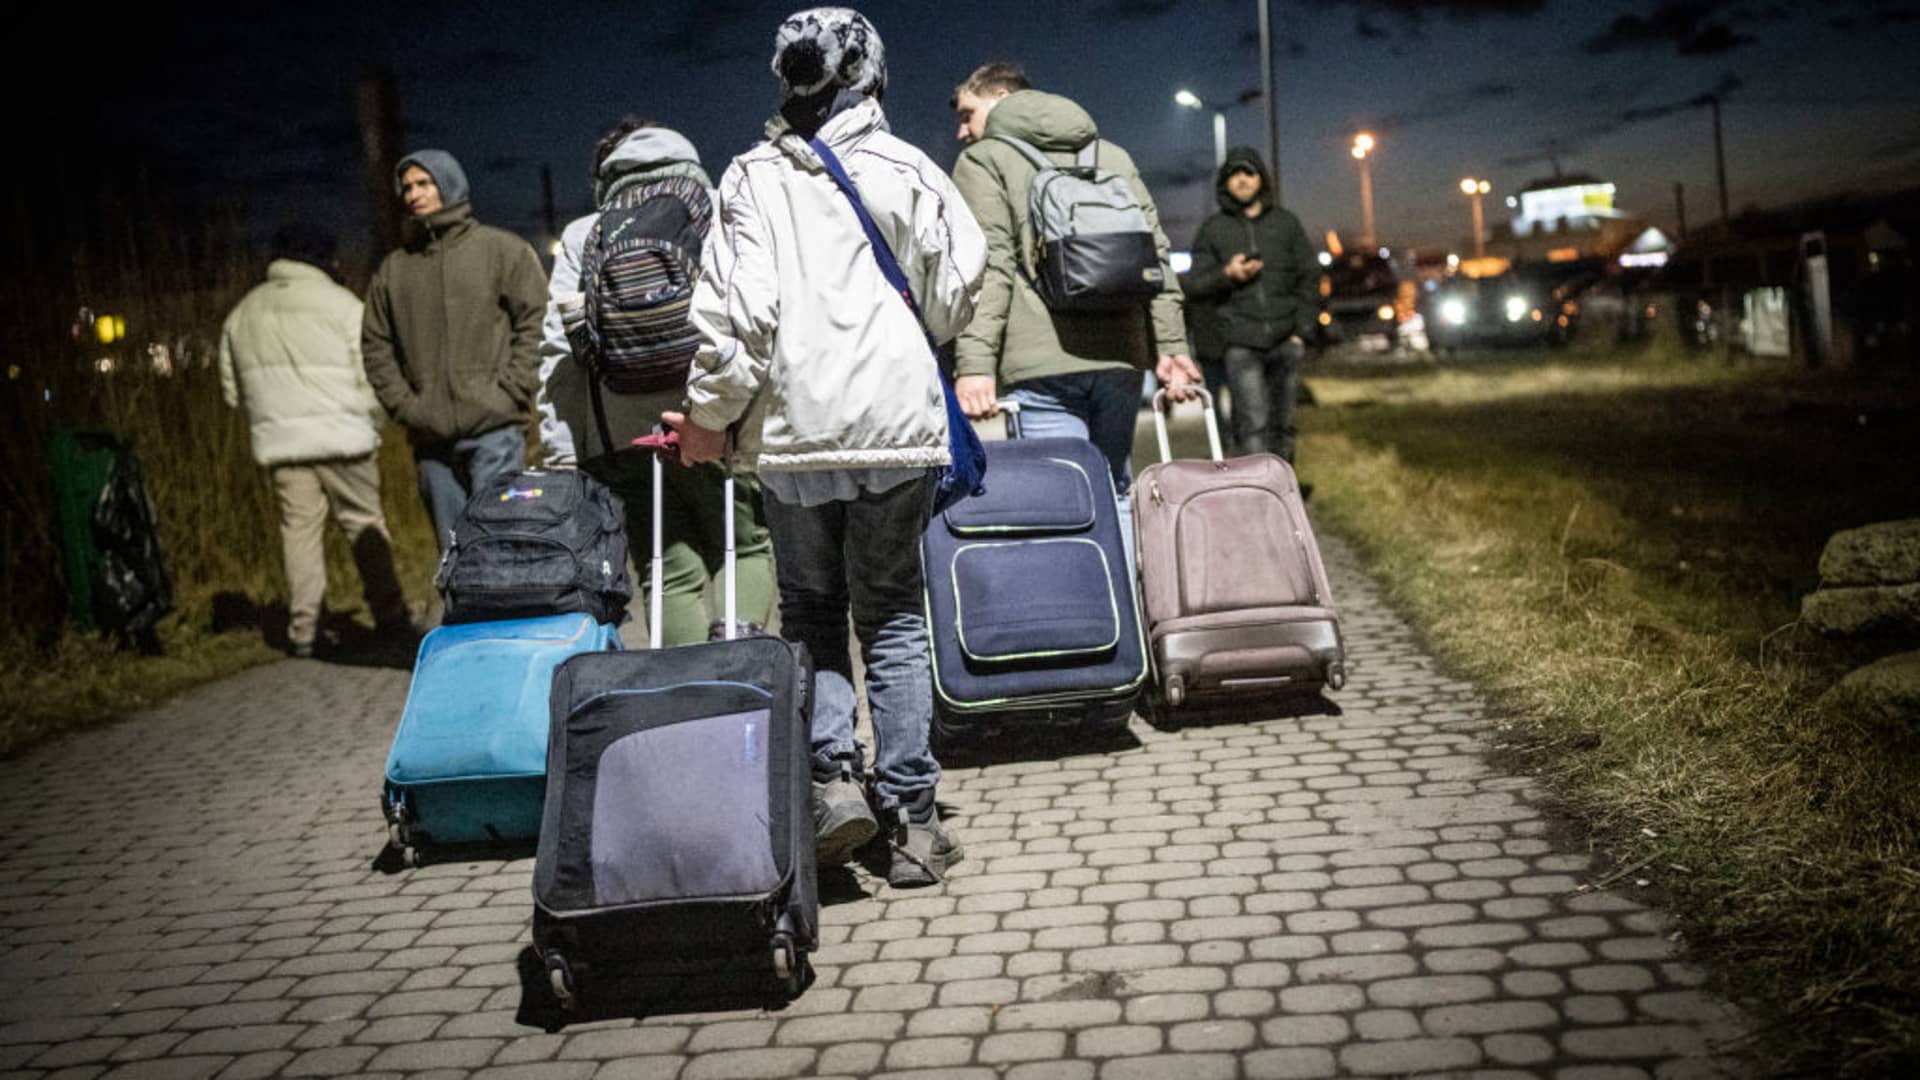 Refugees from Ukraine arrive in Medyka in Poland after crossing the border from Shehyni in Ukraine. Many people leave the country after Russia's attack on Ukraine.